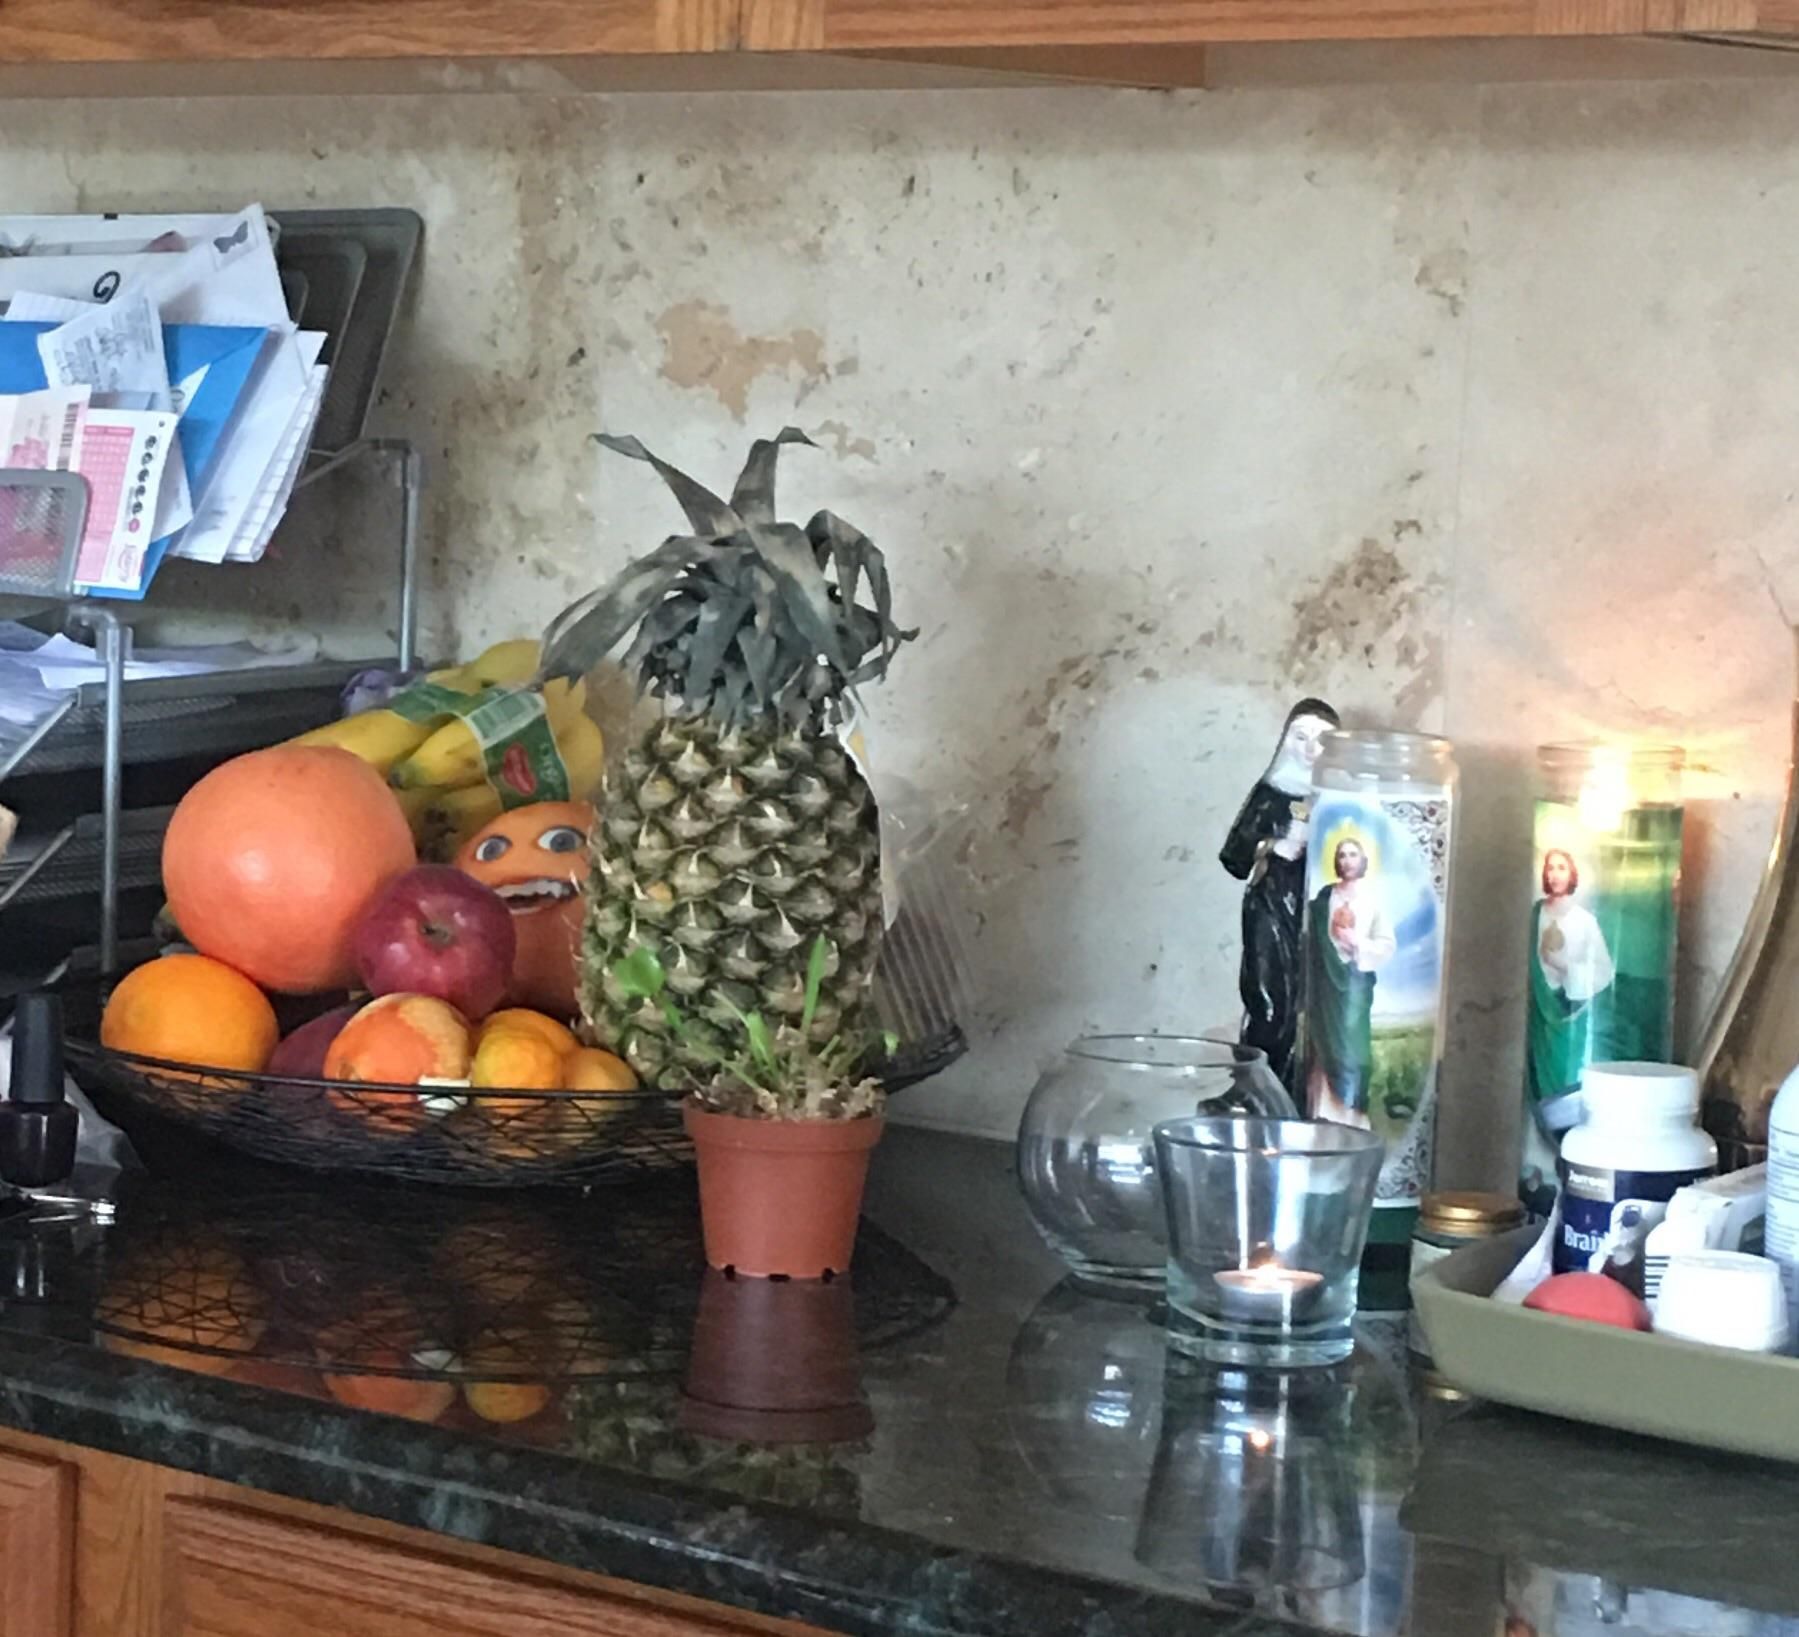 Was having coffee in the kitchen when I look up to the fruit basket....